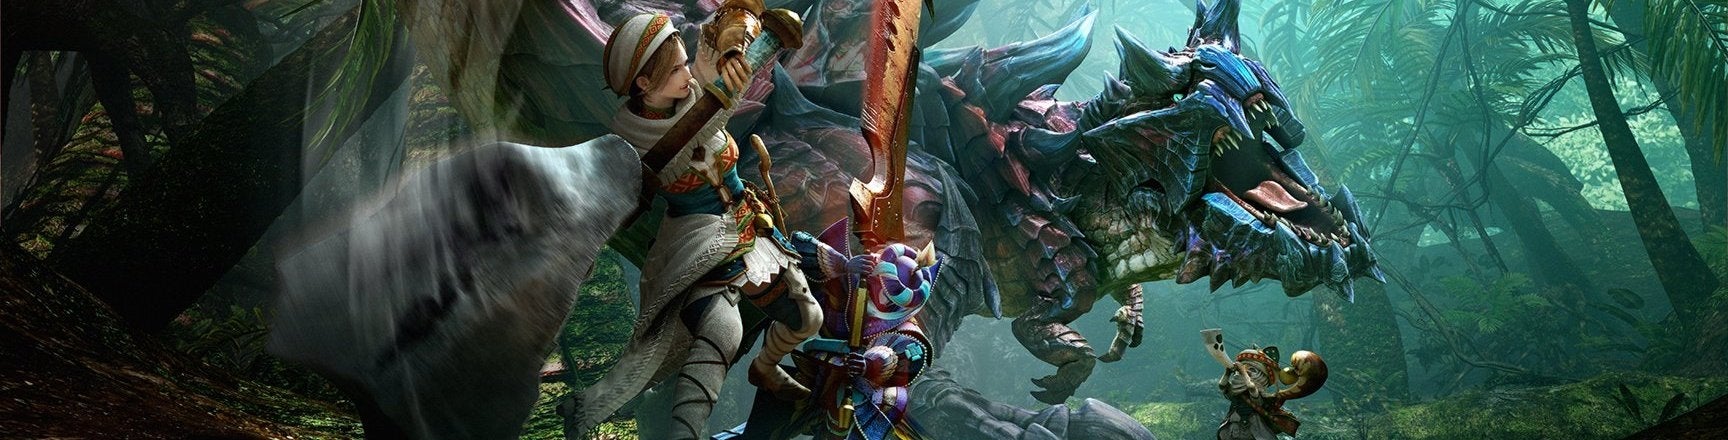 Image for Monster Hunter: Generations review